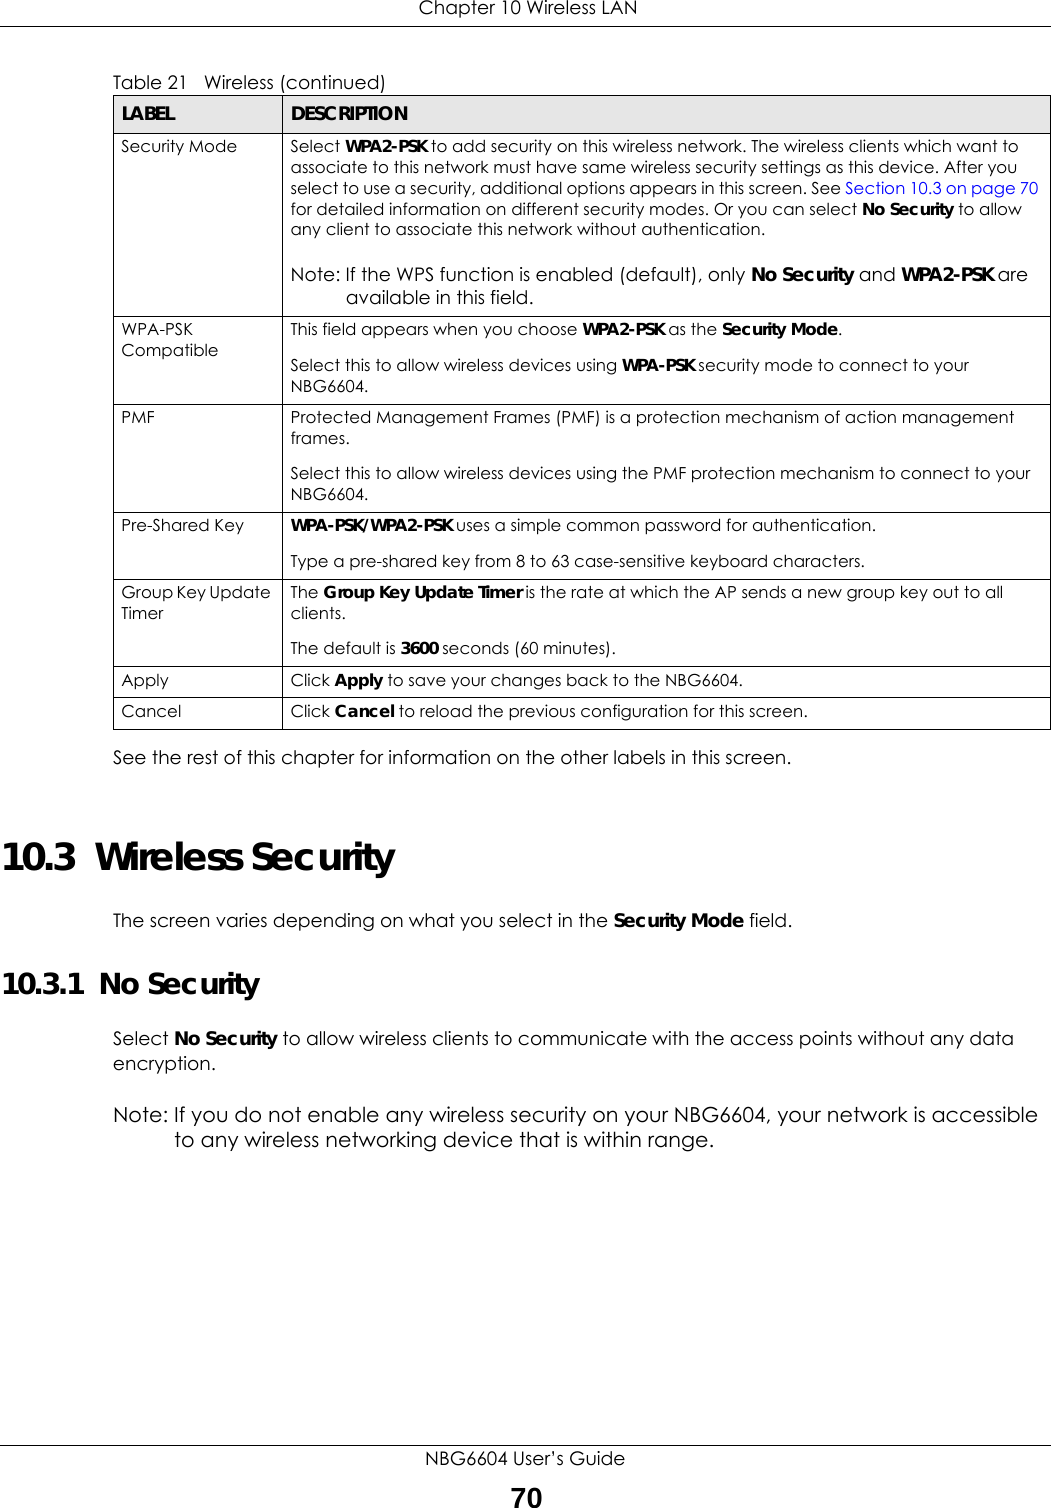  Chapter 10 Wireless LANNBG6604 User’s Guide70See the rest of this chapter for information on the other labels in this screen. 10.3  Wireless SecurityThe screen varies depending on what you select in the Security Mode field.10.3.1  No SecuritySelect No Security to allow wireless clients to communicate with the access points without any data encryption.Note: If you do not enable any wireless security on your NBG6604, your network is accessible to any wireless networking device that is within range.Security Mode Select WPA2-PSK to add security on this wireless network. The wireless clients which want to associate to this network must have same wireless security settings as this device. After you select to use a security, additional options appears in this screen. See Section 10.3 on page 70 for detailed information on different security modes. Or you can select No Security to allow any client to associate this network without authentication.Note: If the WPS function is enabled (default), only No Security and WPA2-PSK are available in this field.WPA-PSK CompatibleThis field appears when you choose WPA2-PSK as the Security Mode.Select this to allow wireless devices using WPA-PSK security mode to connect to your NBG6604.PMF Protected Management Frames (PMF) is a protection mechanism of action management frames.Select this to allow wireless devices using the PMF protection mechanism to connect to your NBG6604.Pre-Shared Key WPA-PSK/WPA2-PSK uses a simple common password for authentication.Type a pre-shared key from 8 to 63 case-sensitive keyboard characters.Group Key Update TimerThe Group Key Update Timer is the rate at which the AP sends a new group key out to all clients. The default is 3600 seconds (60 minutes).Apply Click Apply to save your changes back to the NBG6604.Cancel Click Cancel to reload the previous configuration for this screen.Table 21   Wireless (continued) LABEL DESCRIPTION